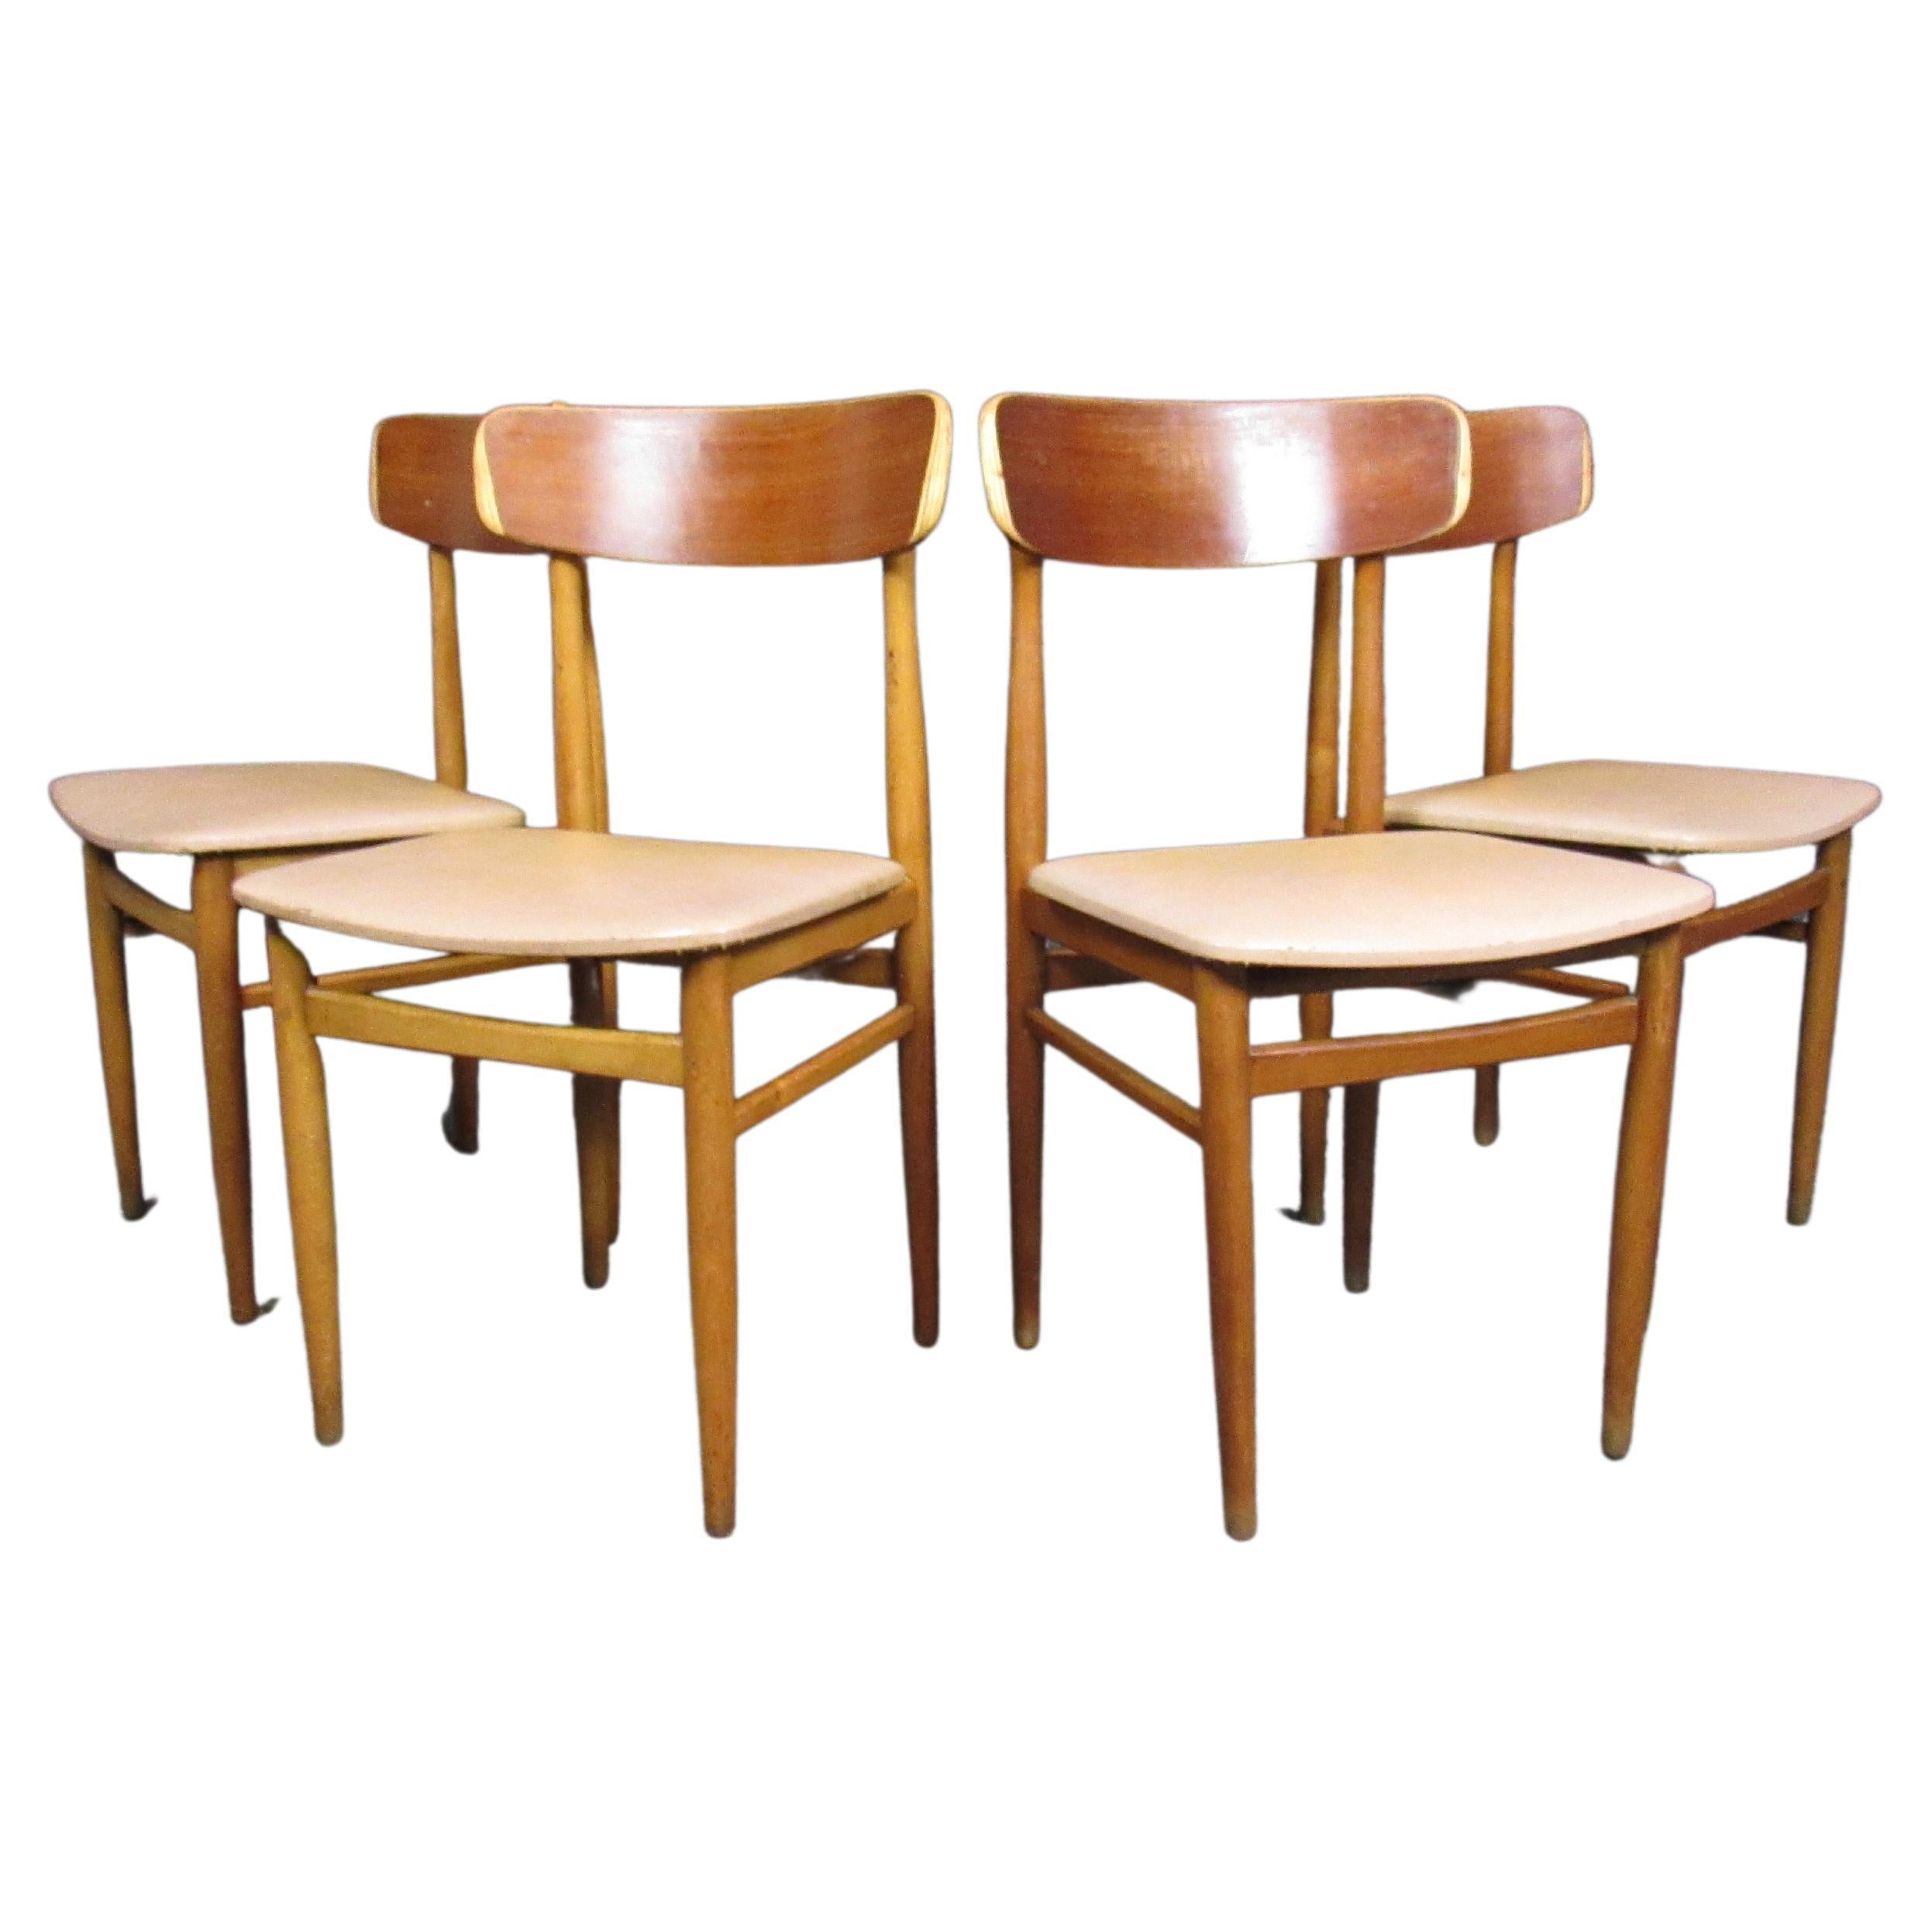 Midcentury Danish Bent Plywood Dining Chairs For Sale